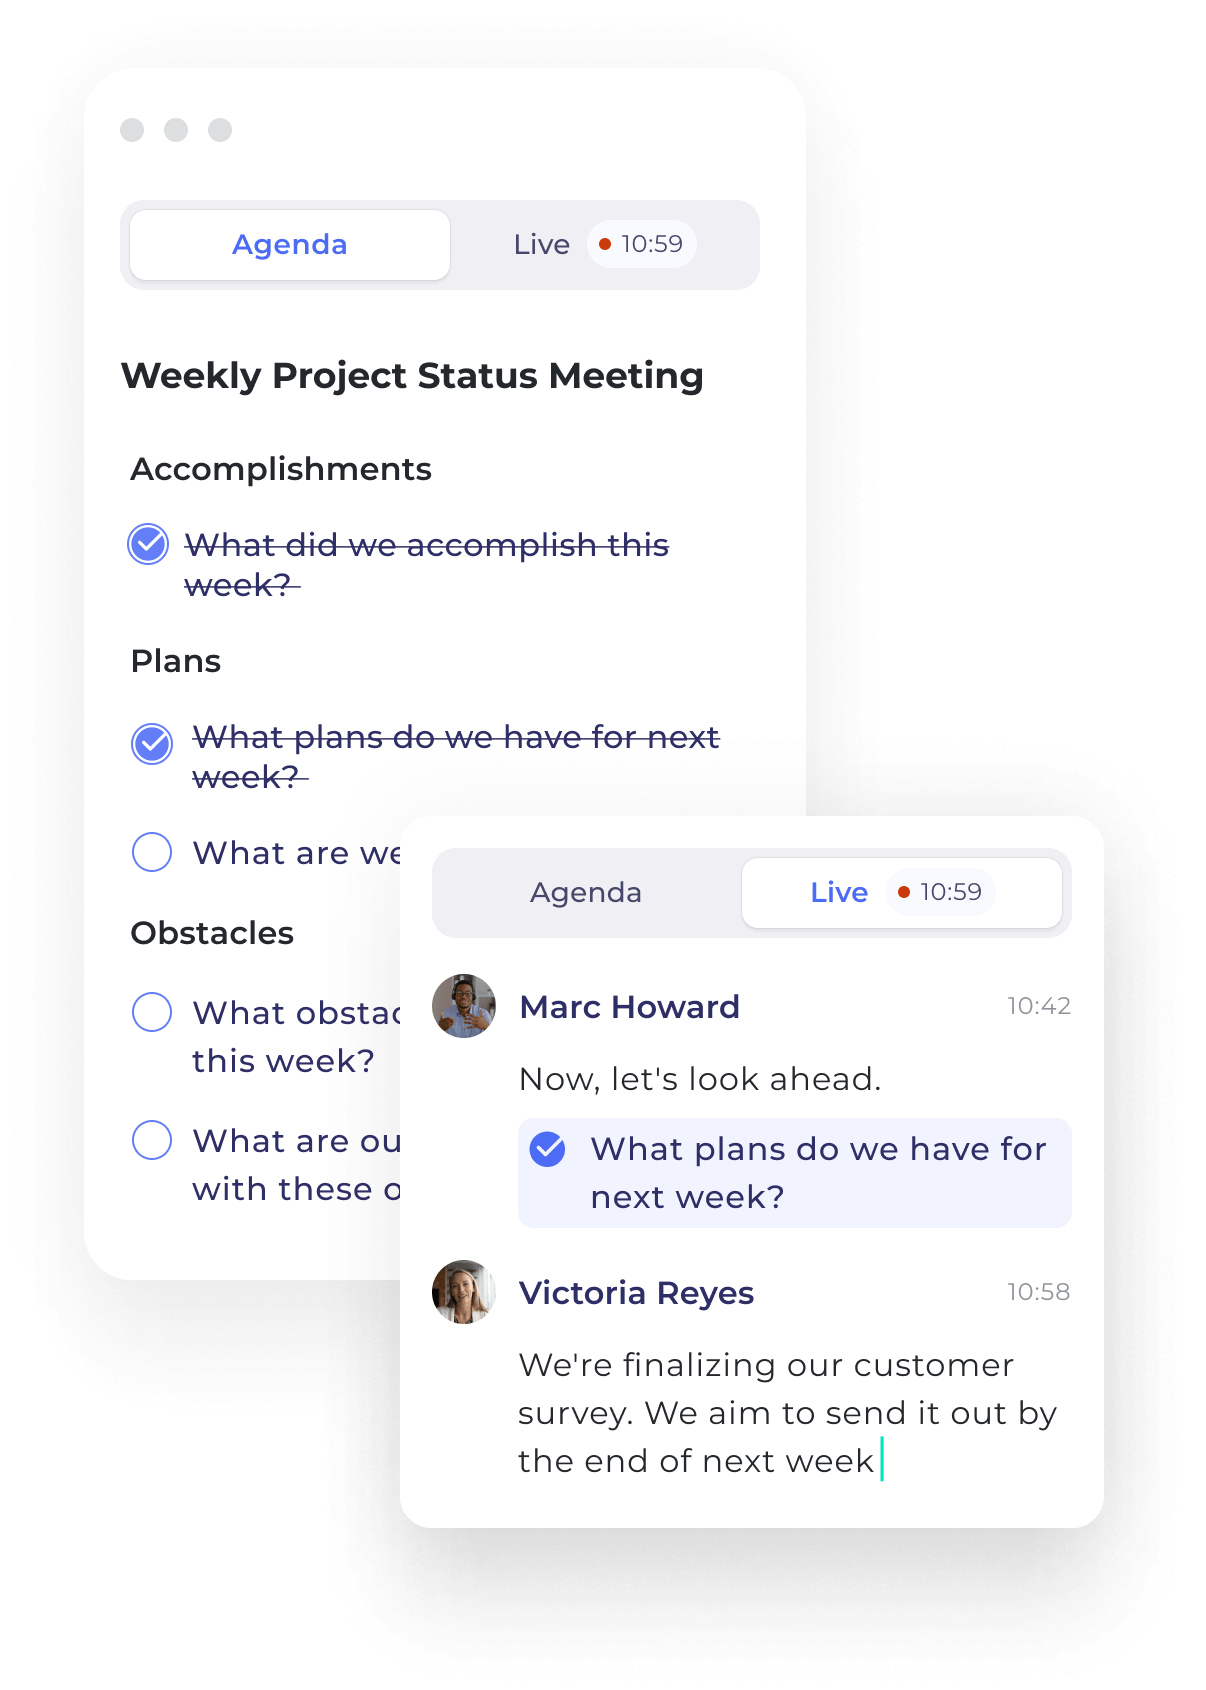 Keep your meetings on track